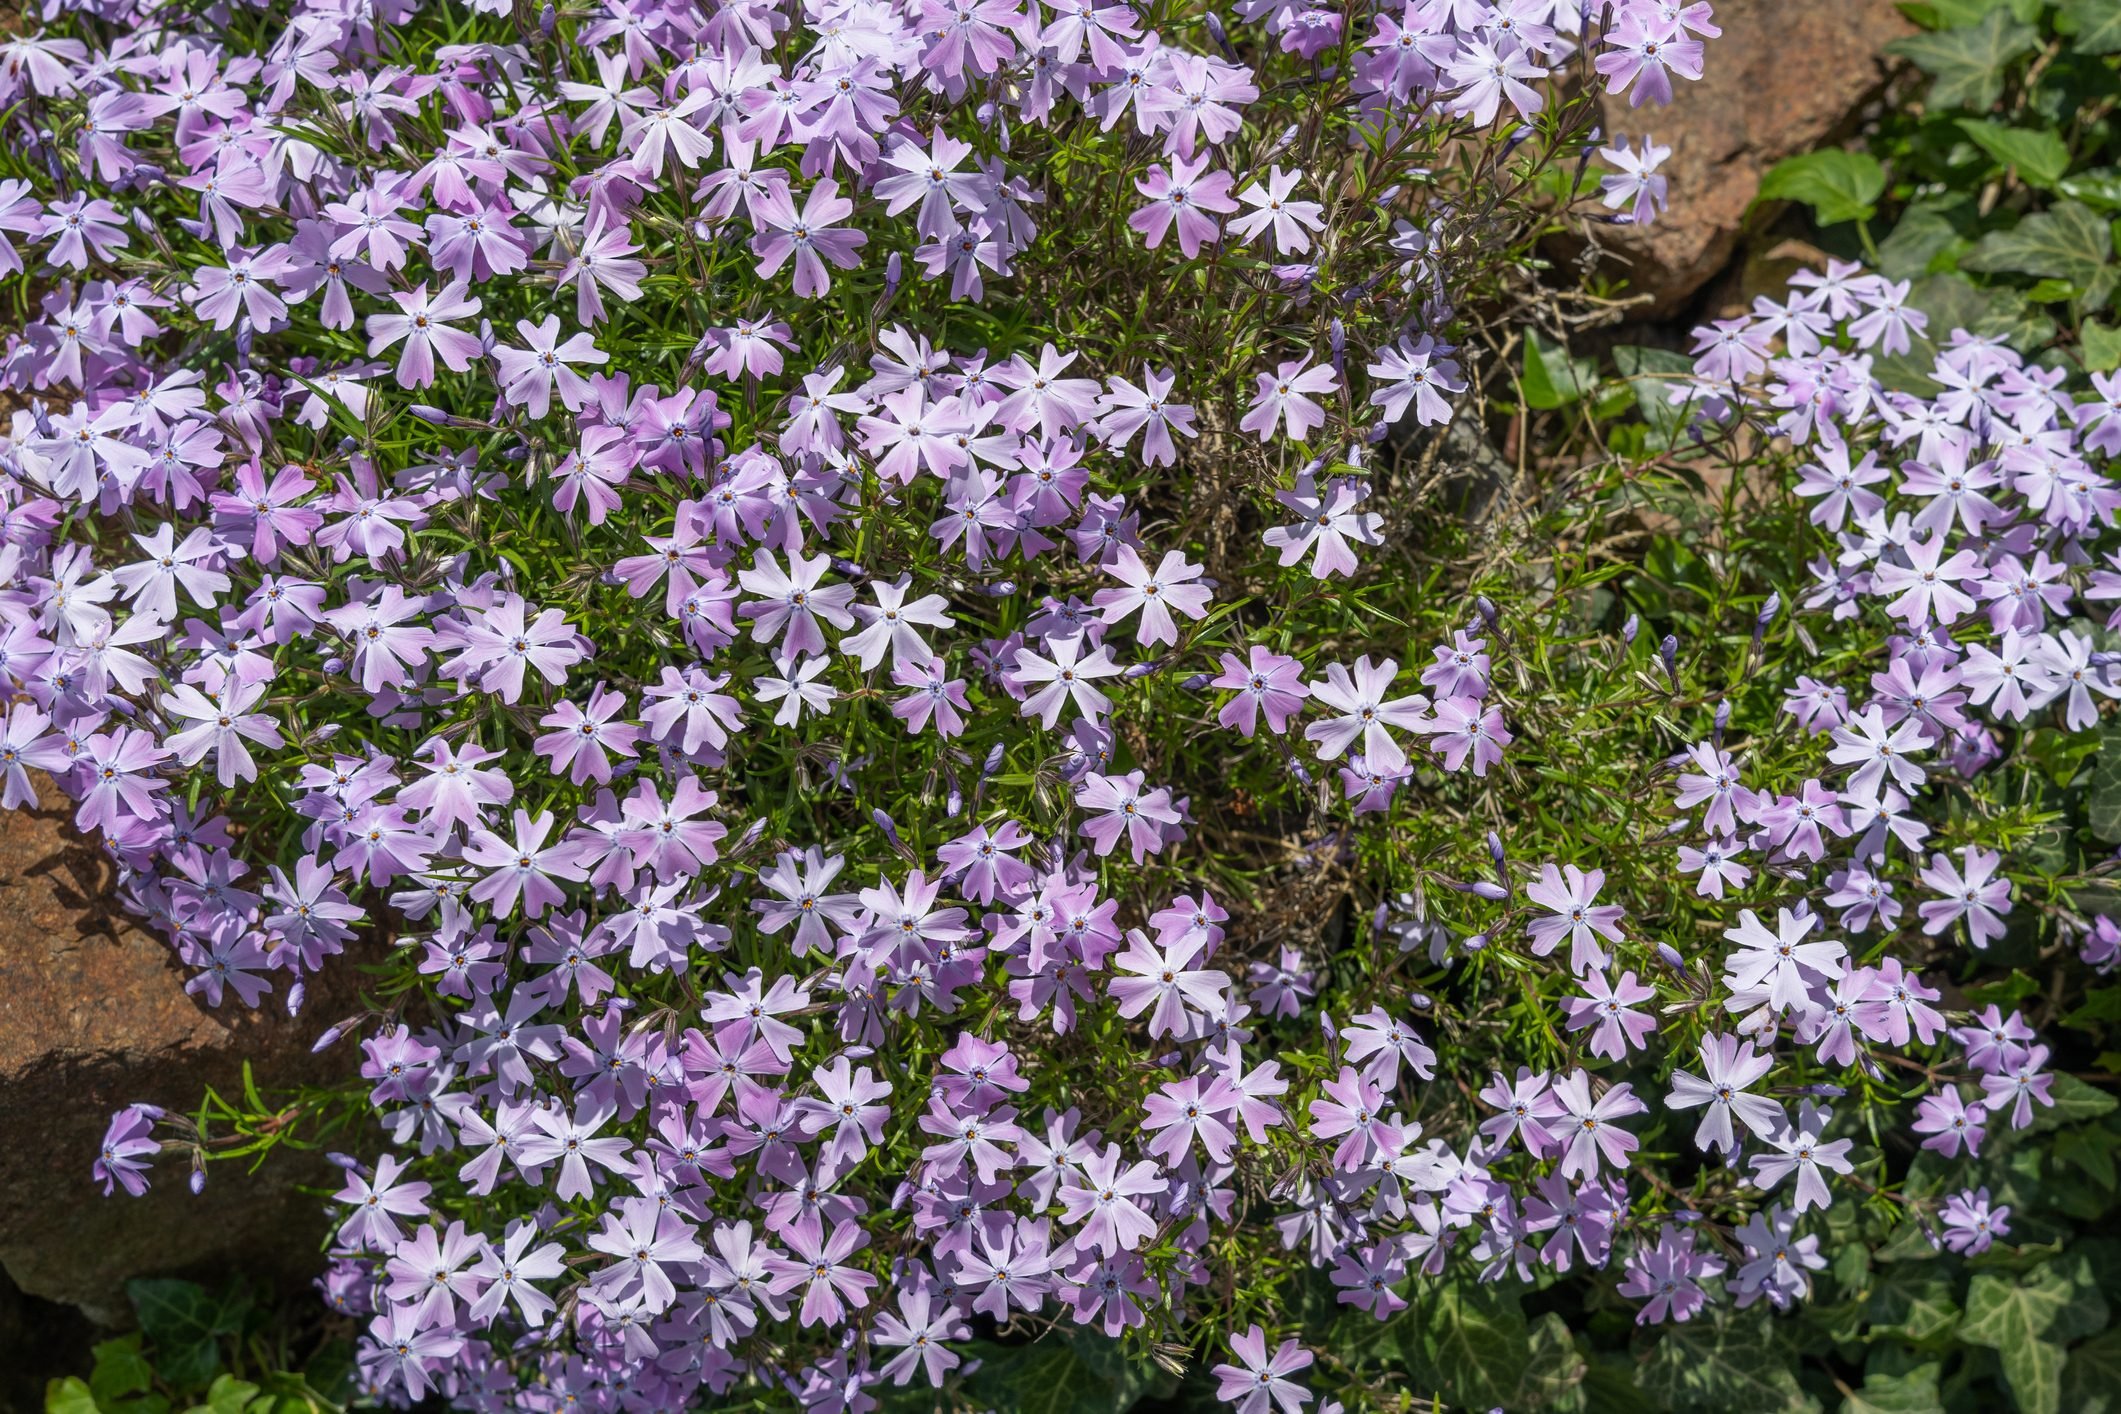  5 Flowering Drought-Tolerant Ground Cover Plants